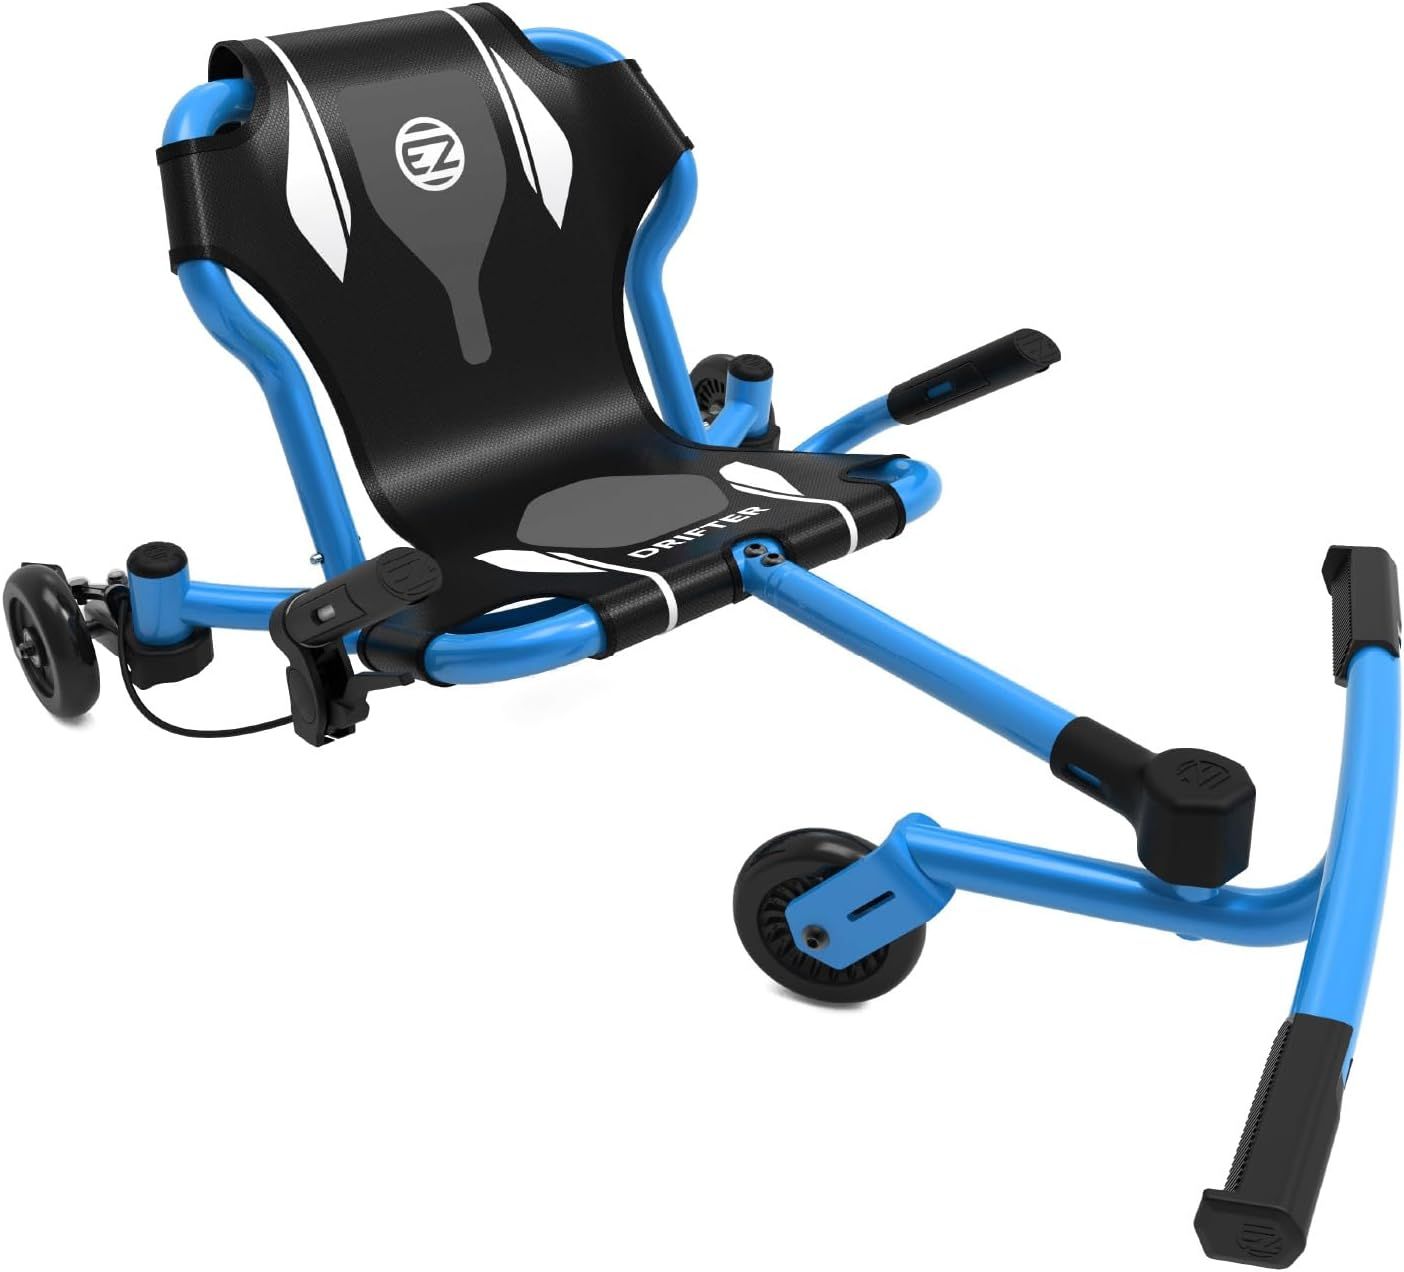 EzyRoller New Drifter-X Ride on Toy for Ages 6 and Older, Up to 150lbs. - Blue | Amazon (US)